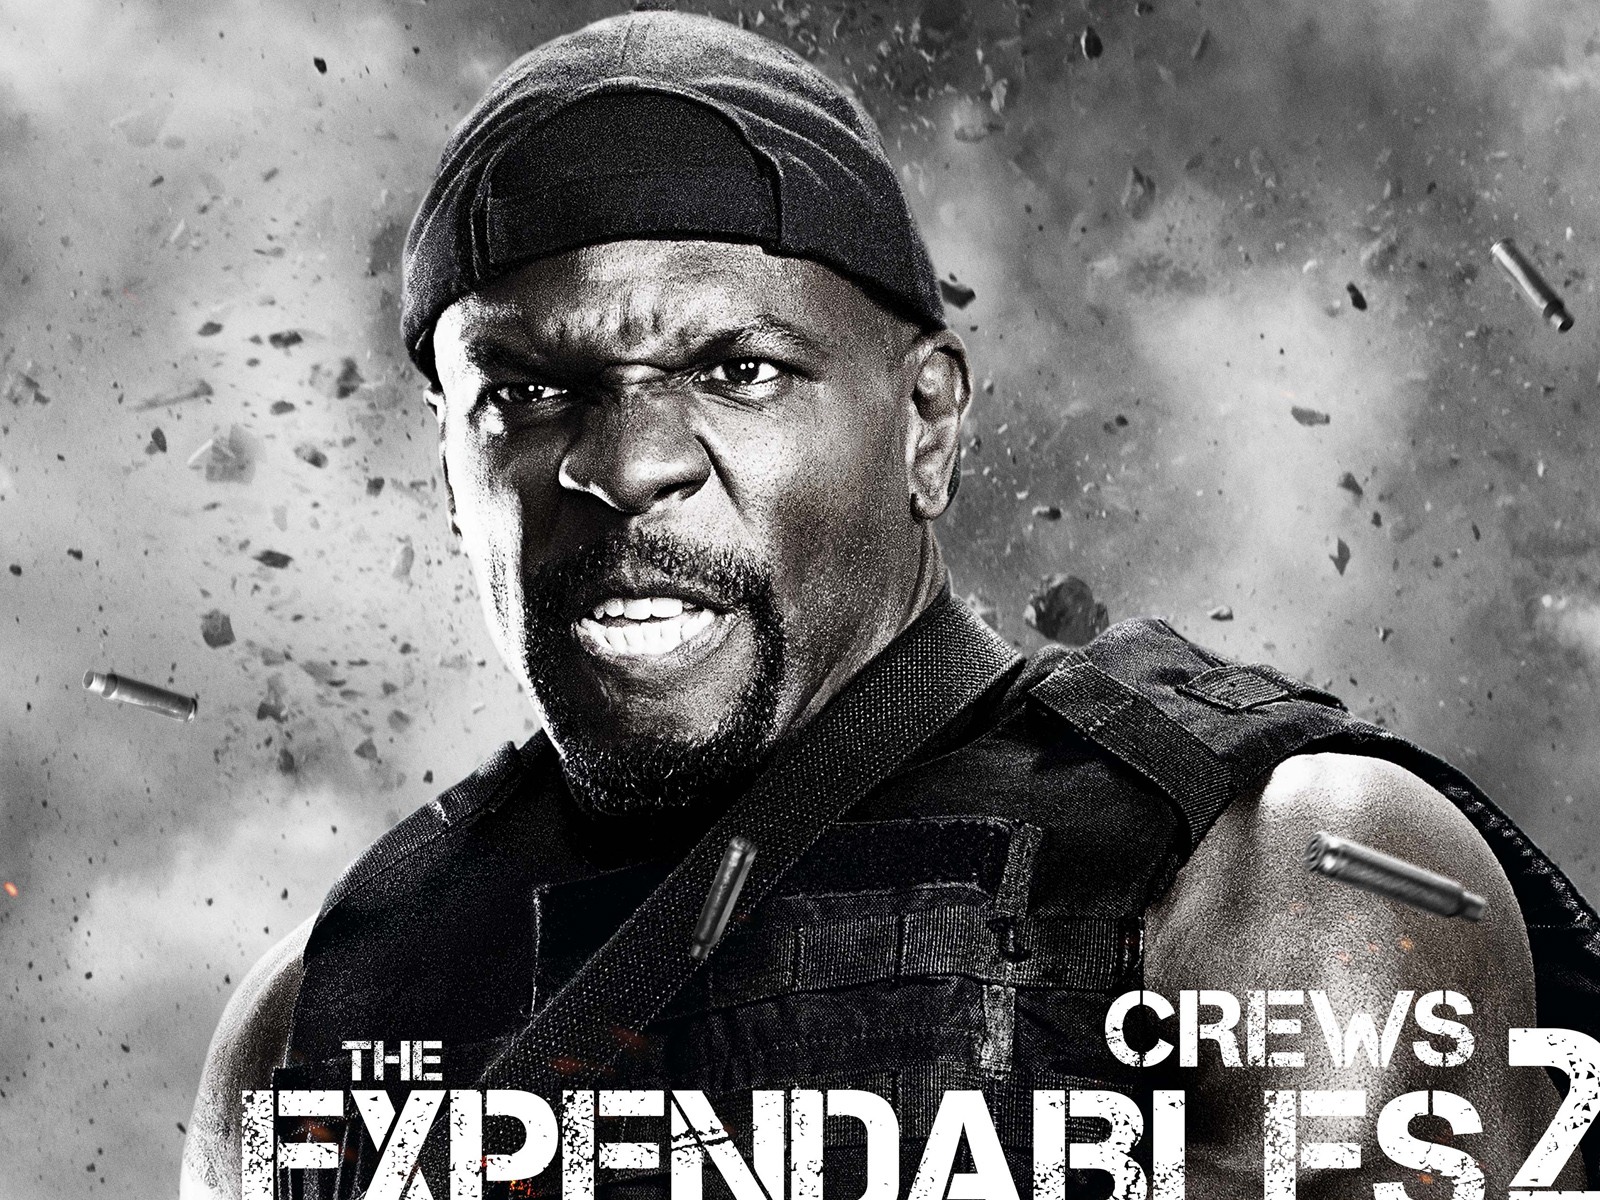 2012 The Expendables 2 敢死队2 高清壁纸10 - 1600x1200